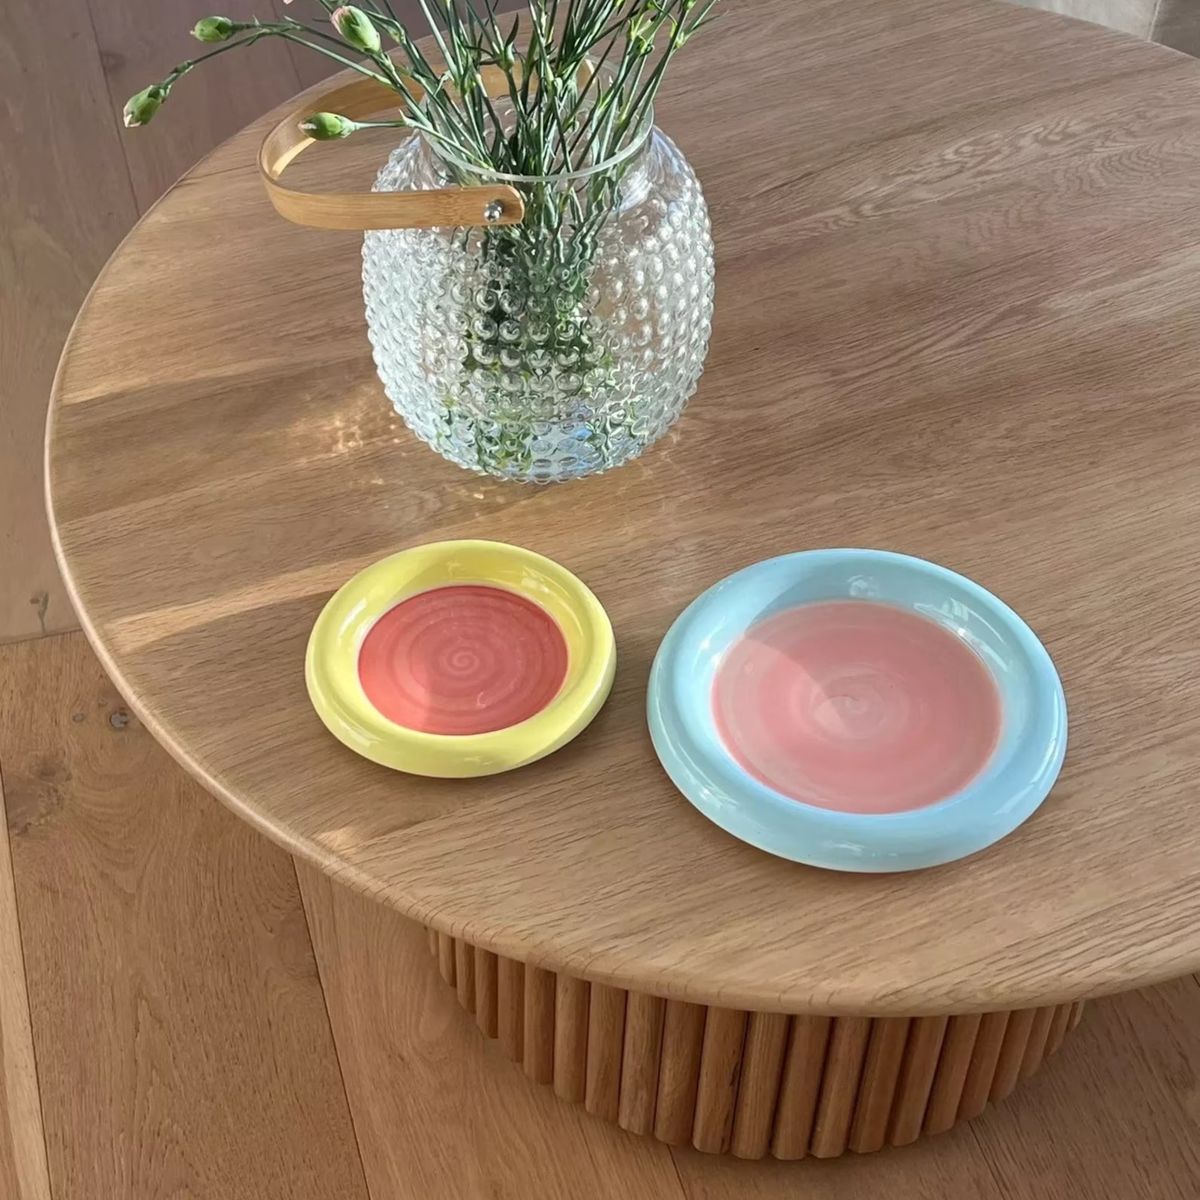 'Bubble plates' are the cutest viral TikTok trend – here's where to find them